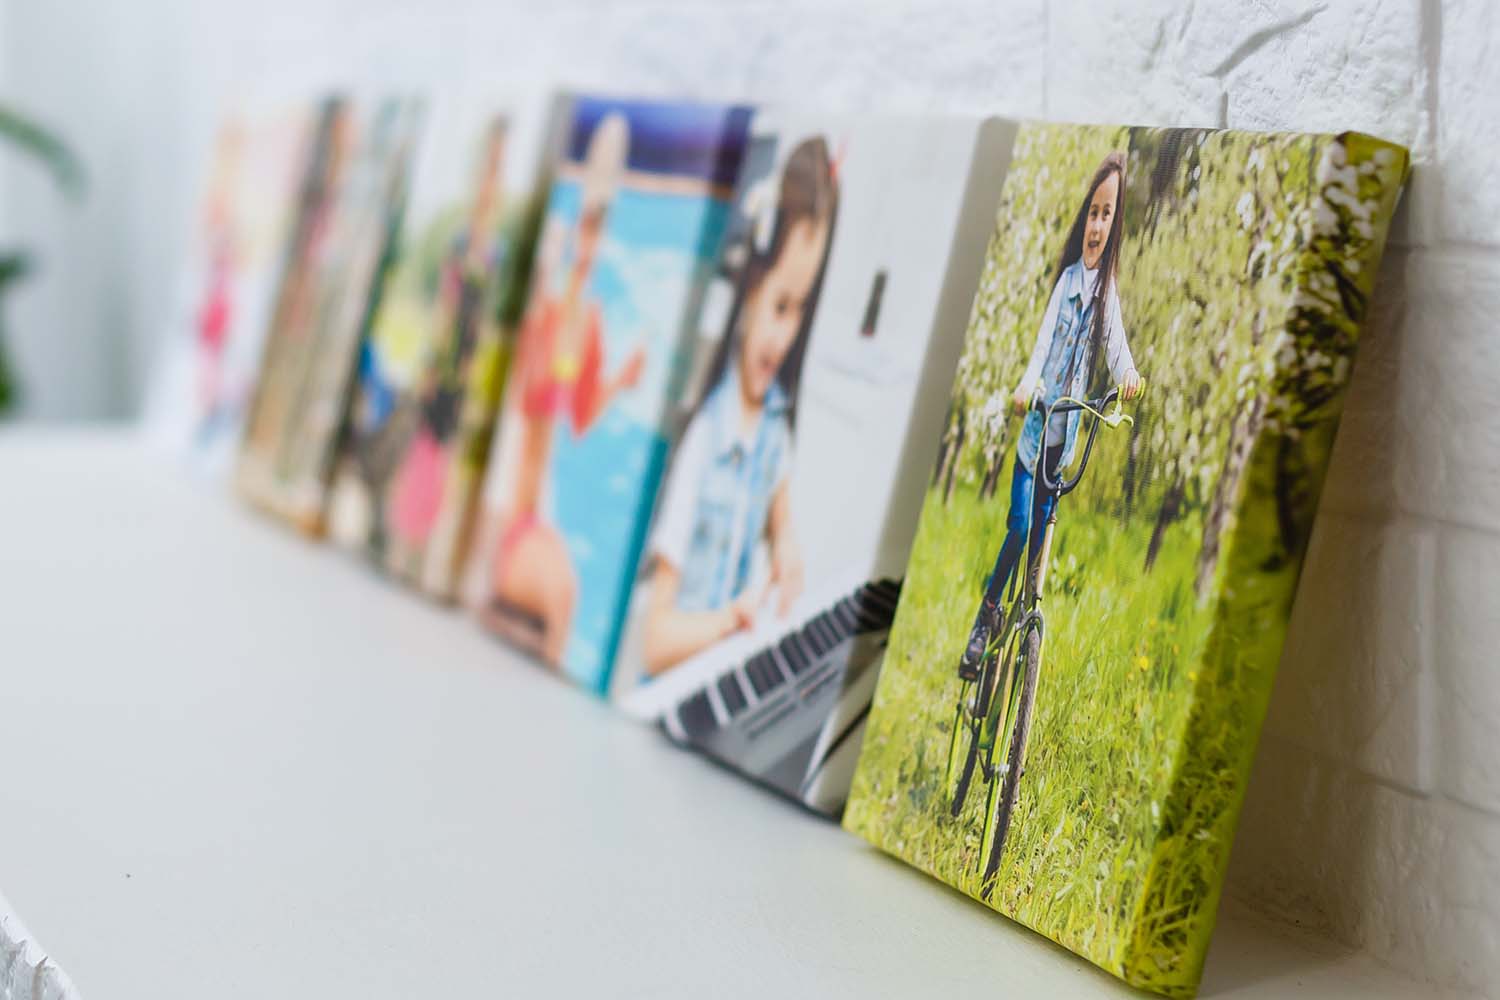 How To Choose The Best Photo For Canvas Printing